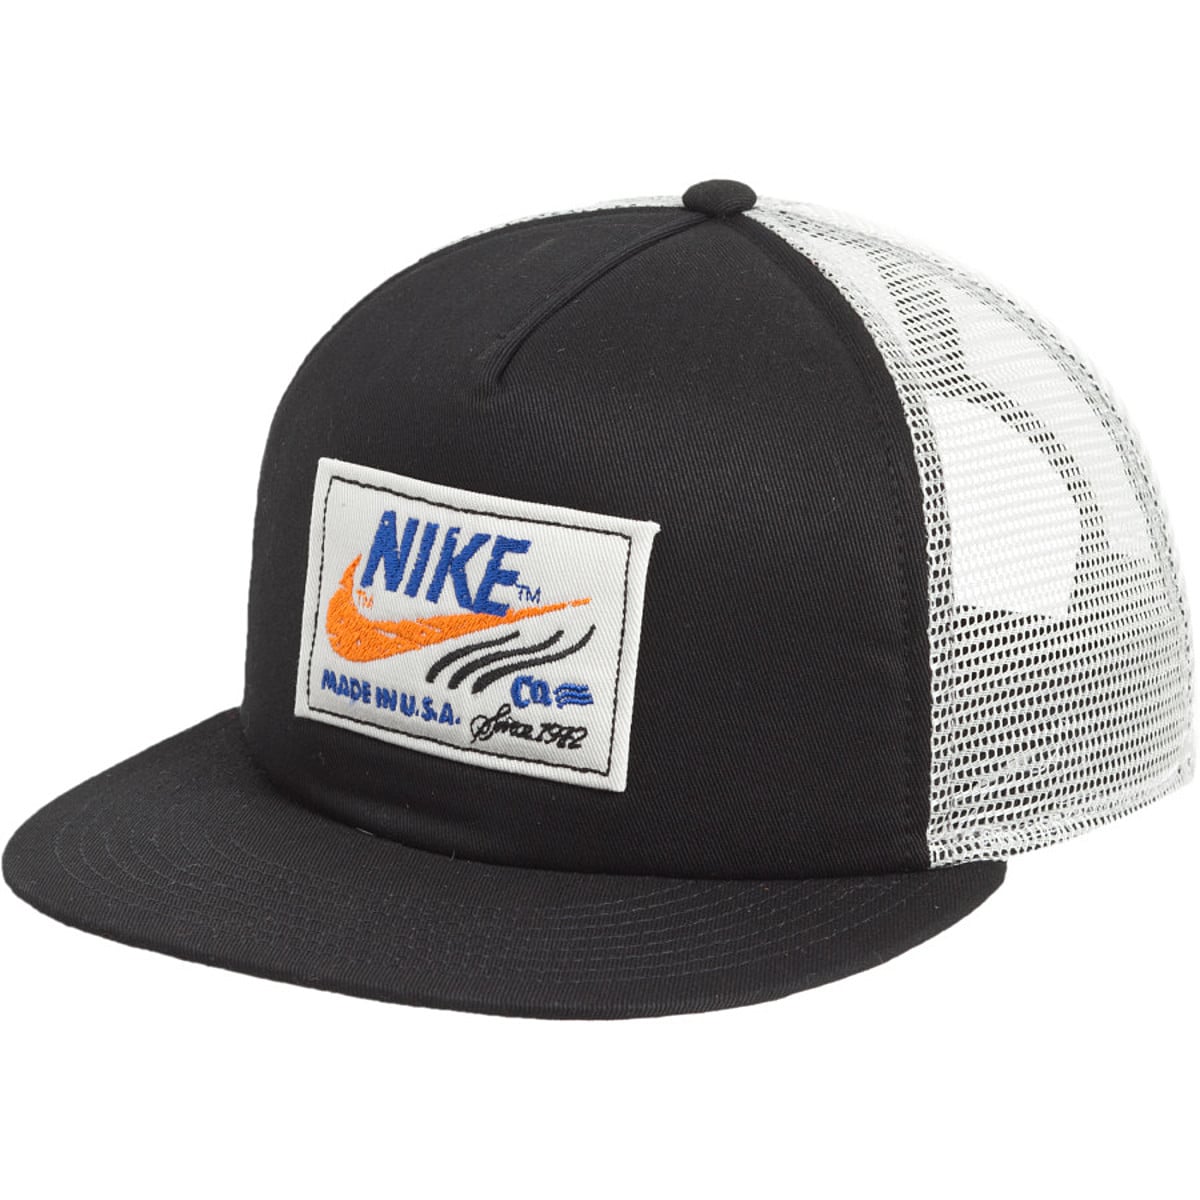 Nike Labeled Snapback Trucker Hat - Accessories